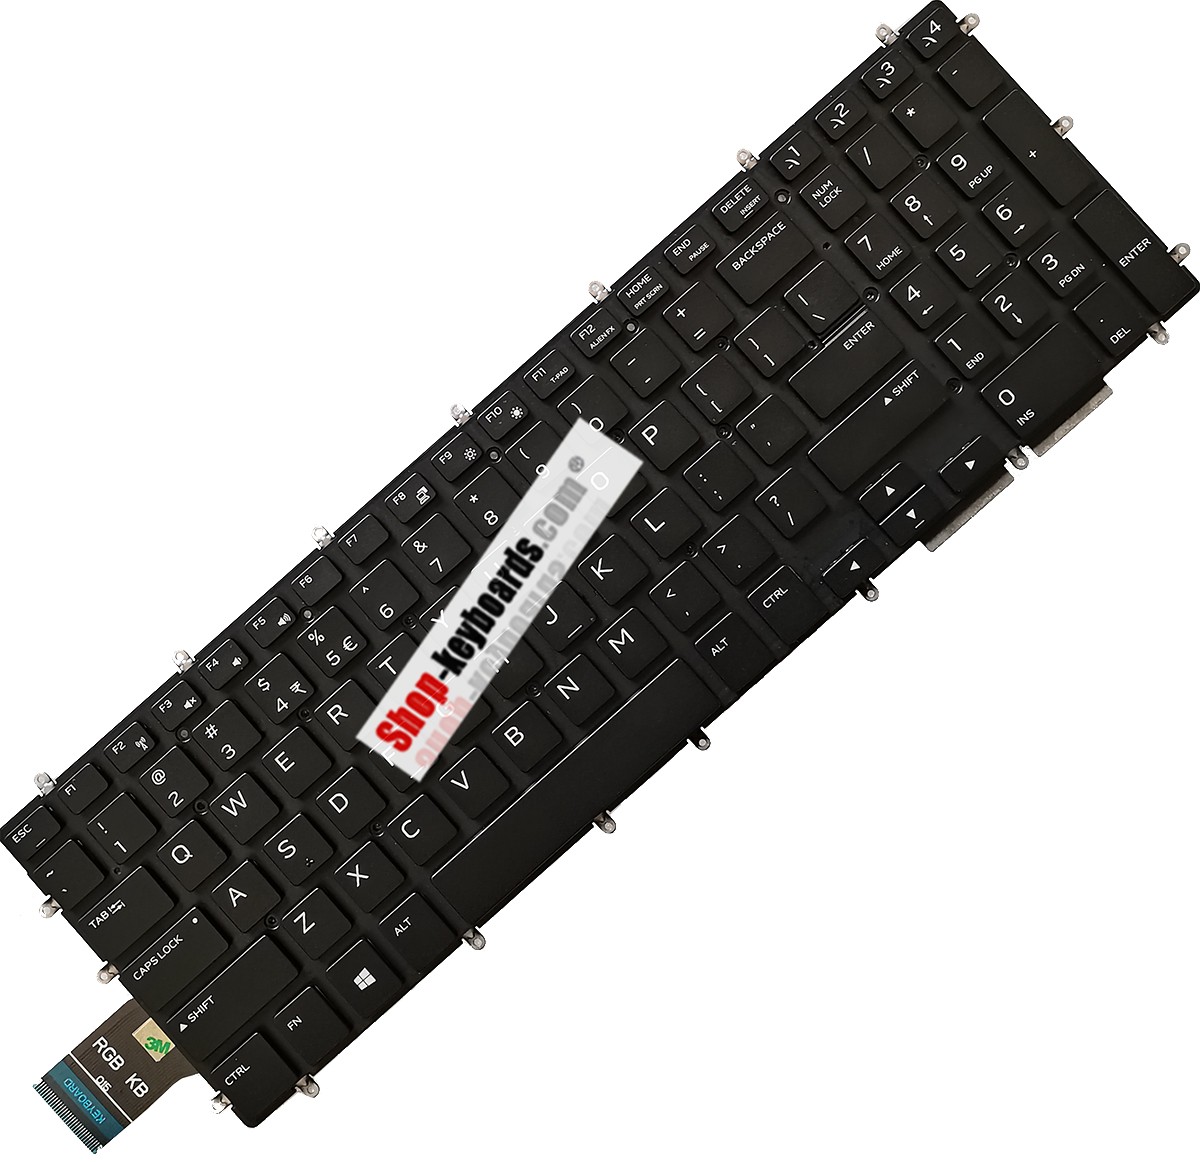 Dell 0KN4-0D1UK13 Keyboard replacement